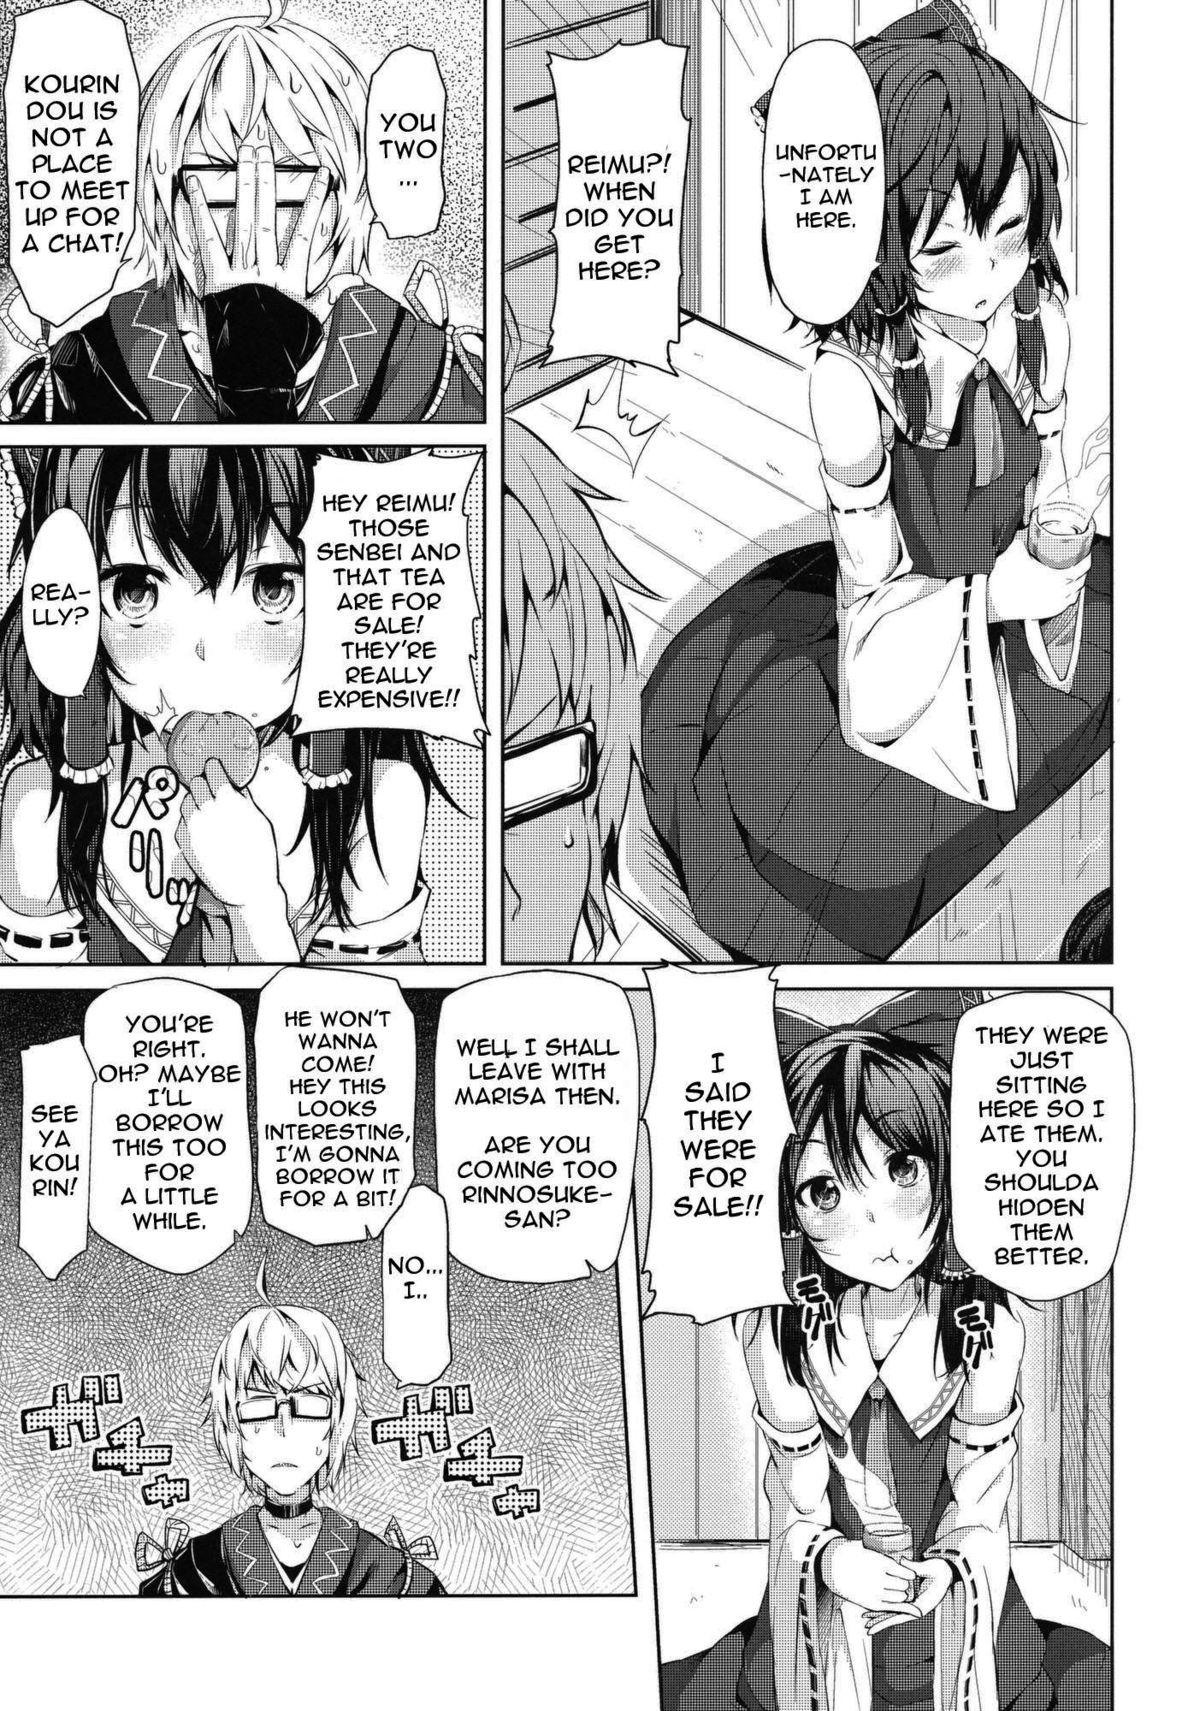 Camgirl Zutto Kourin no Turn! Turn 1 me | It's Always Kourin's Turn - First Turn - Touhou project Mas - Page 6